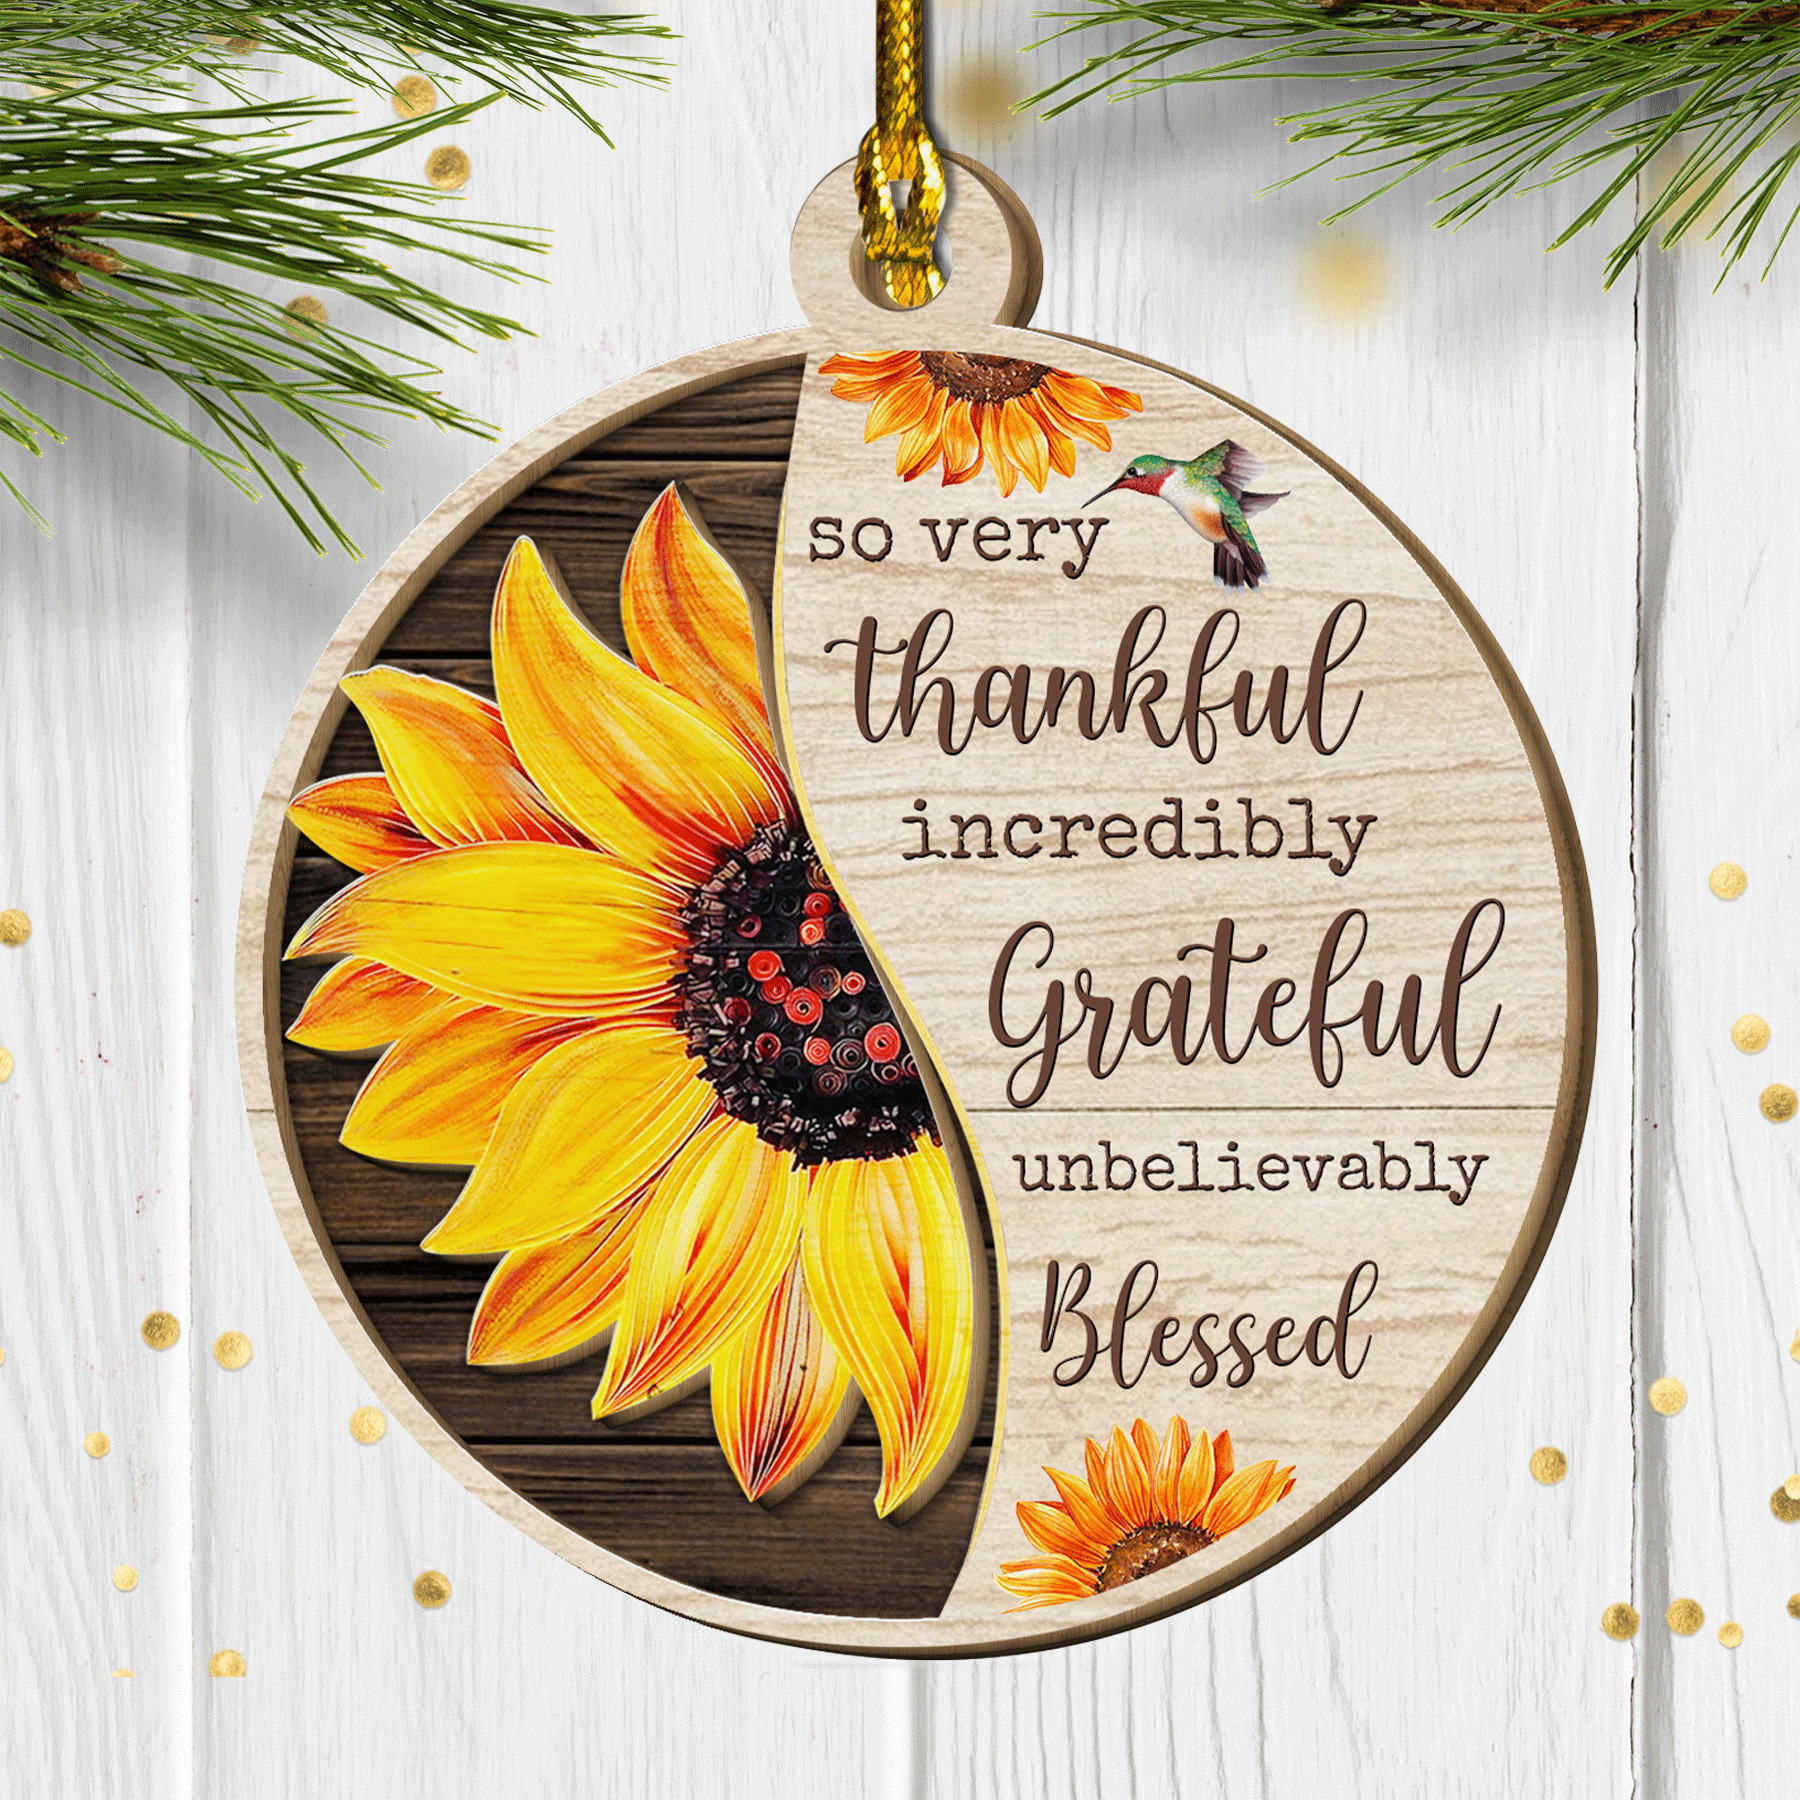 Sunflower, Incredibly grateful, unbelievably blessed - Jesus Wooden Ornament - Amzanimalsgift